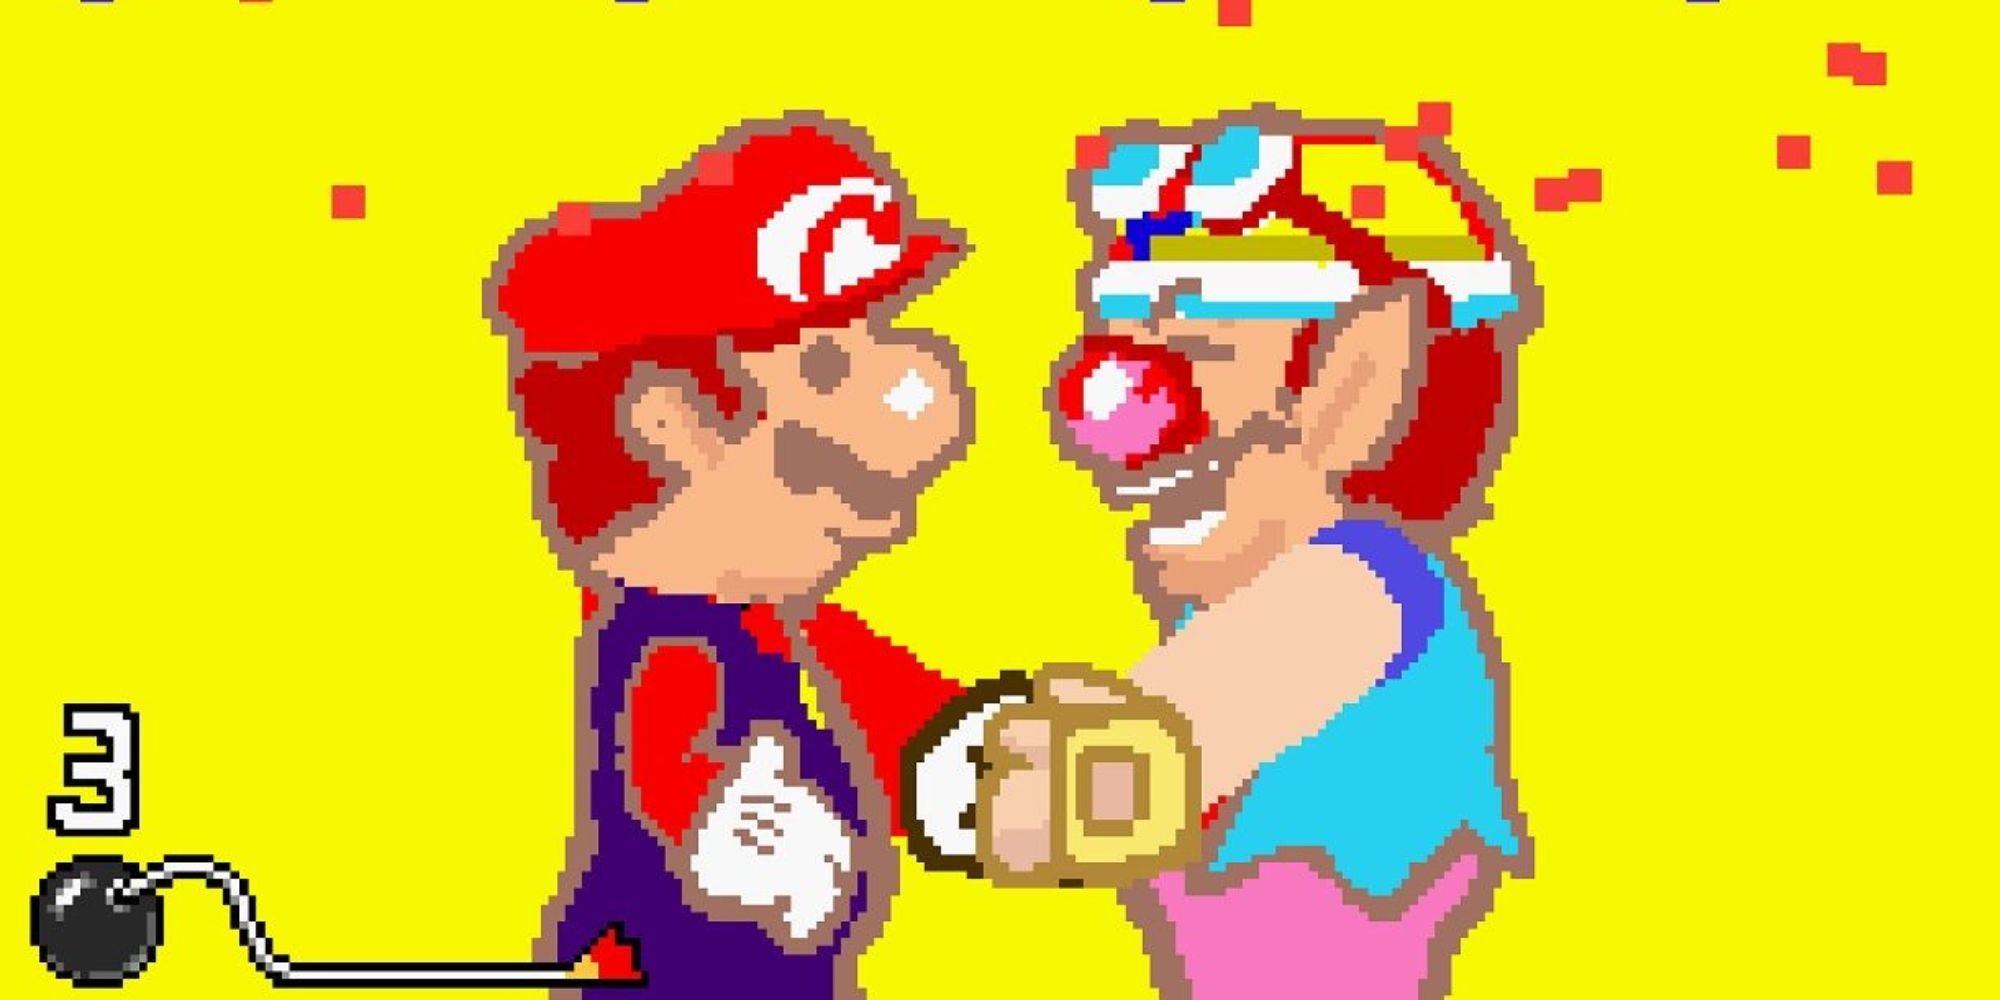 Wario and Mario shake hands in a microgame